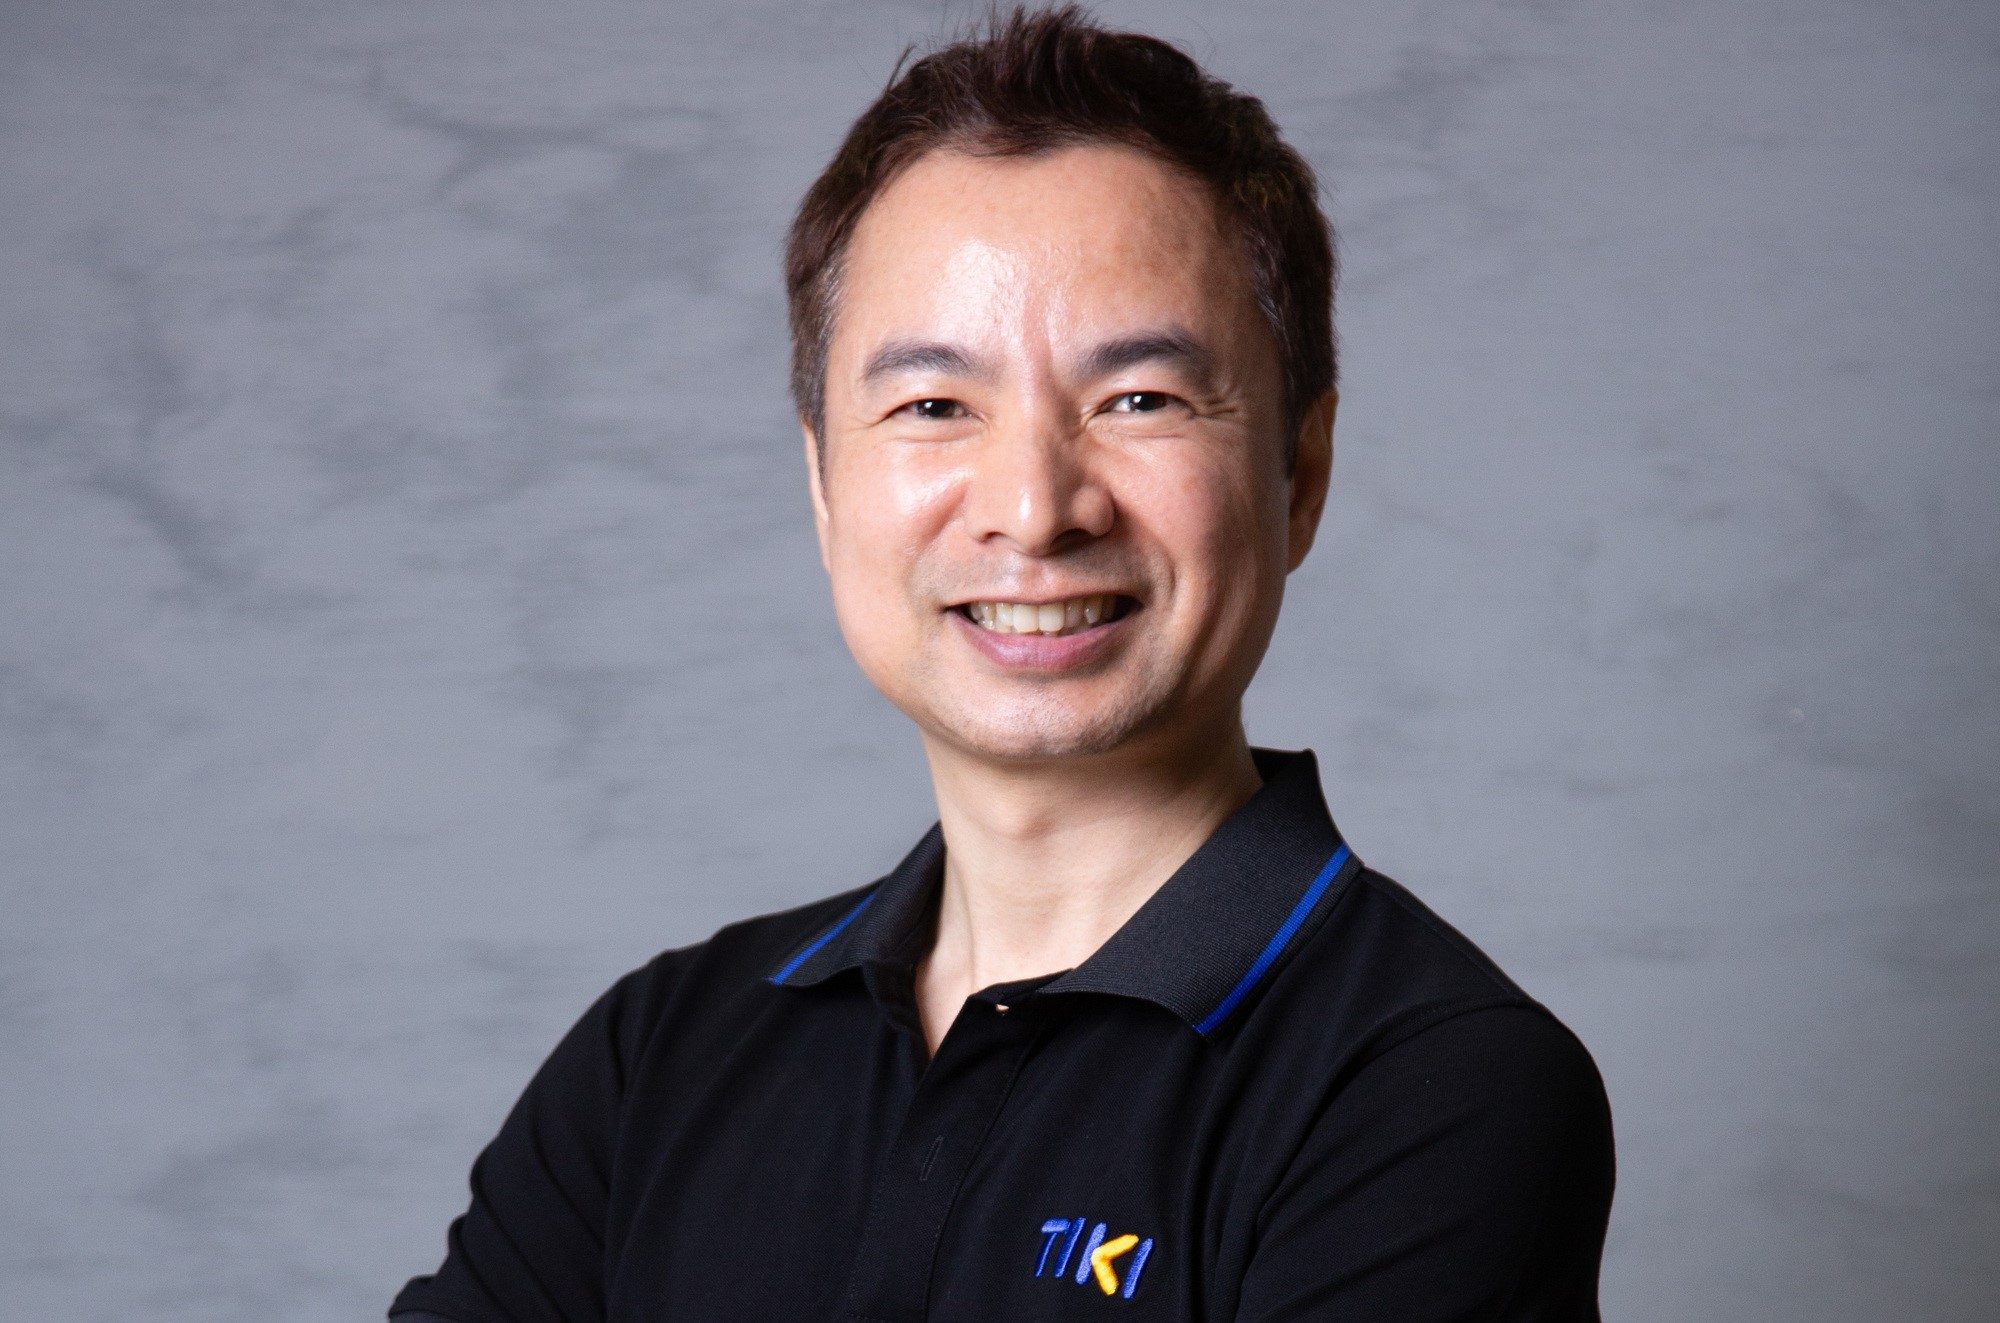 Vietnamese e-commerce firm Tiki appoints new CEO, replacing founder